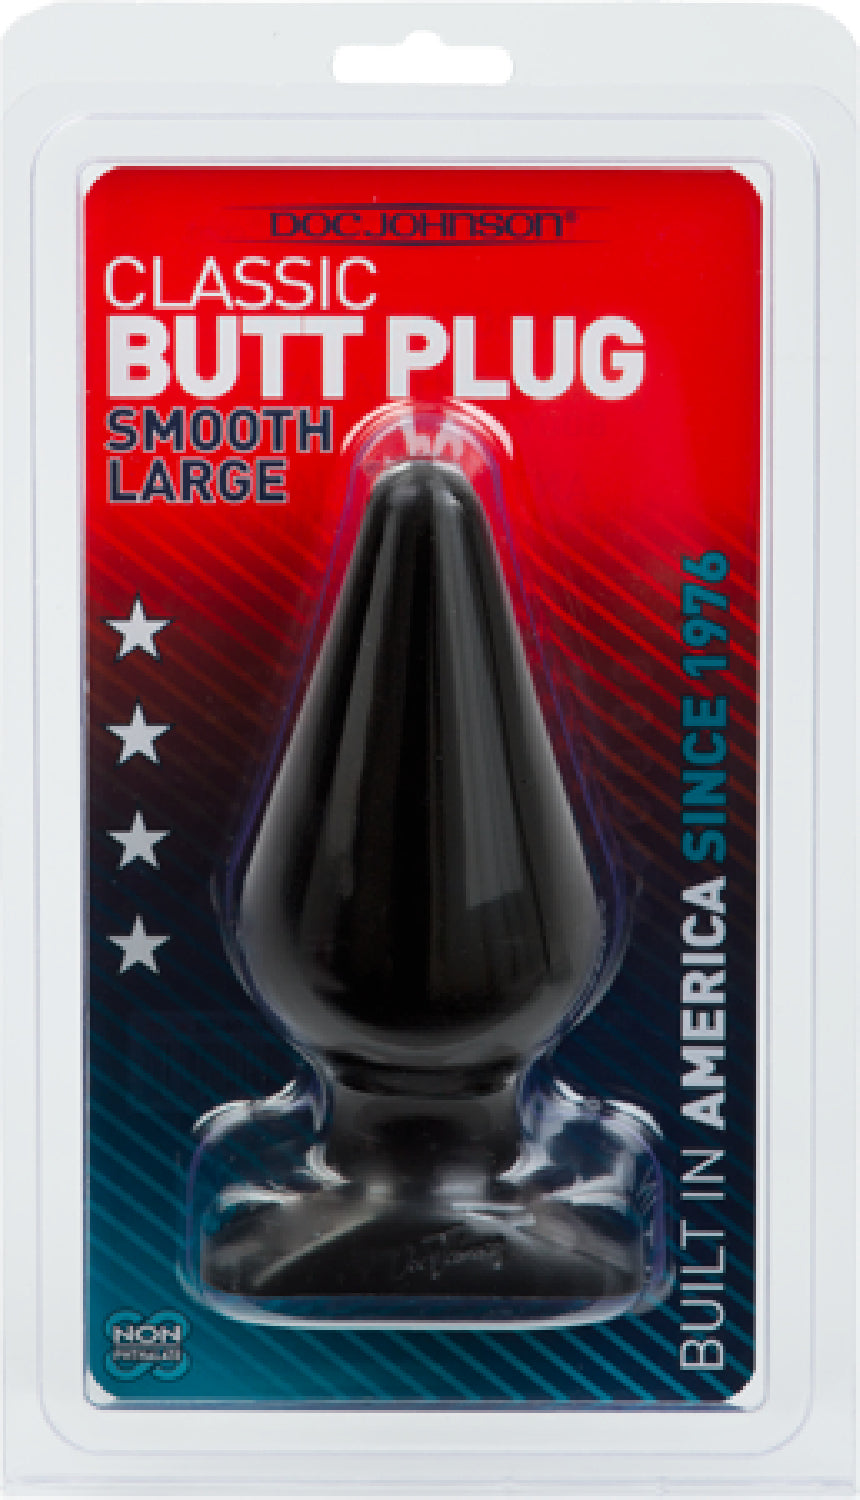 Doc Johnson Classic Butt Plug Smooth Large Black - One Stop Adult Shop